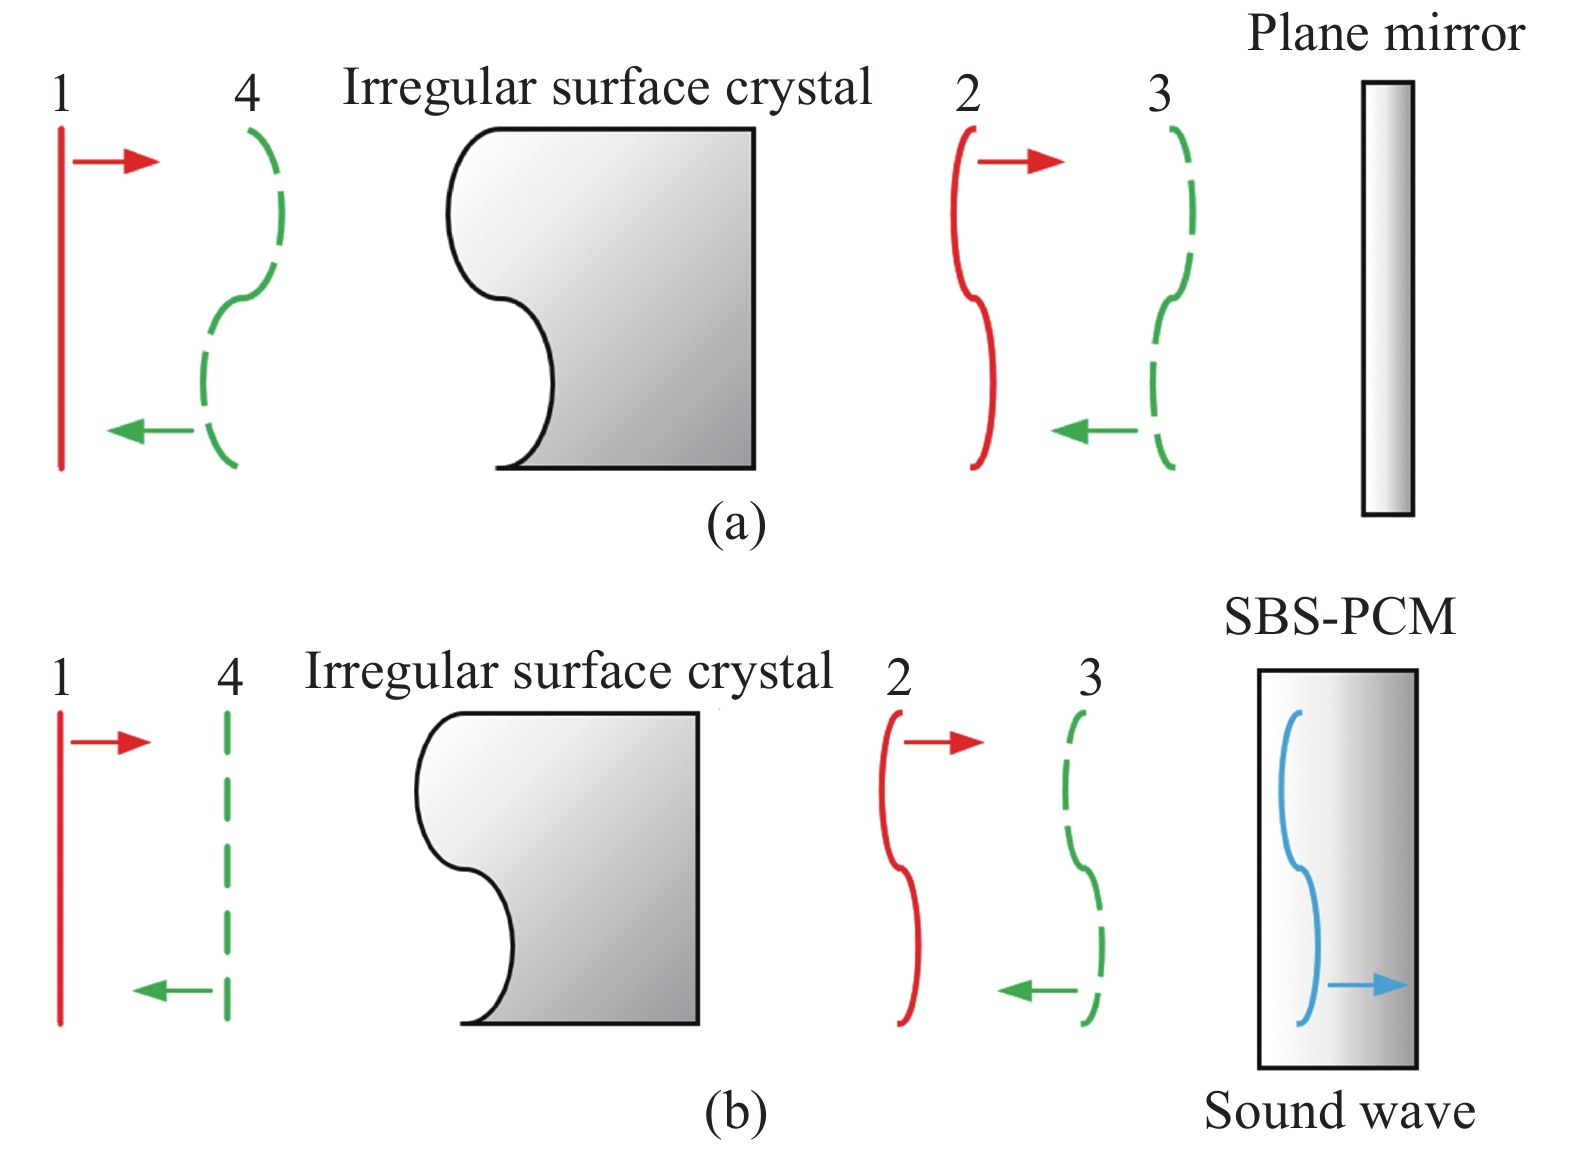 Evolution of the wavefront as the beam pass a round trip through crystal with an irregular surface. (a) Reflected by plane mirror; (b) Reflected by SBS-PCM